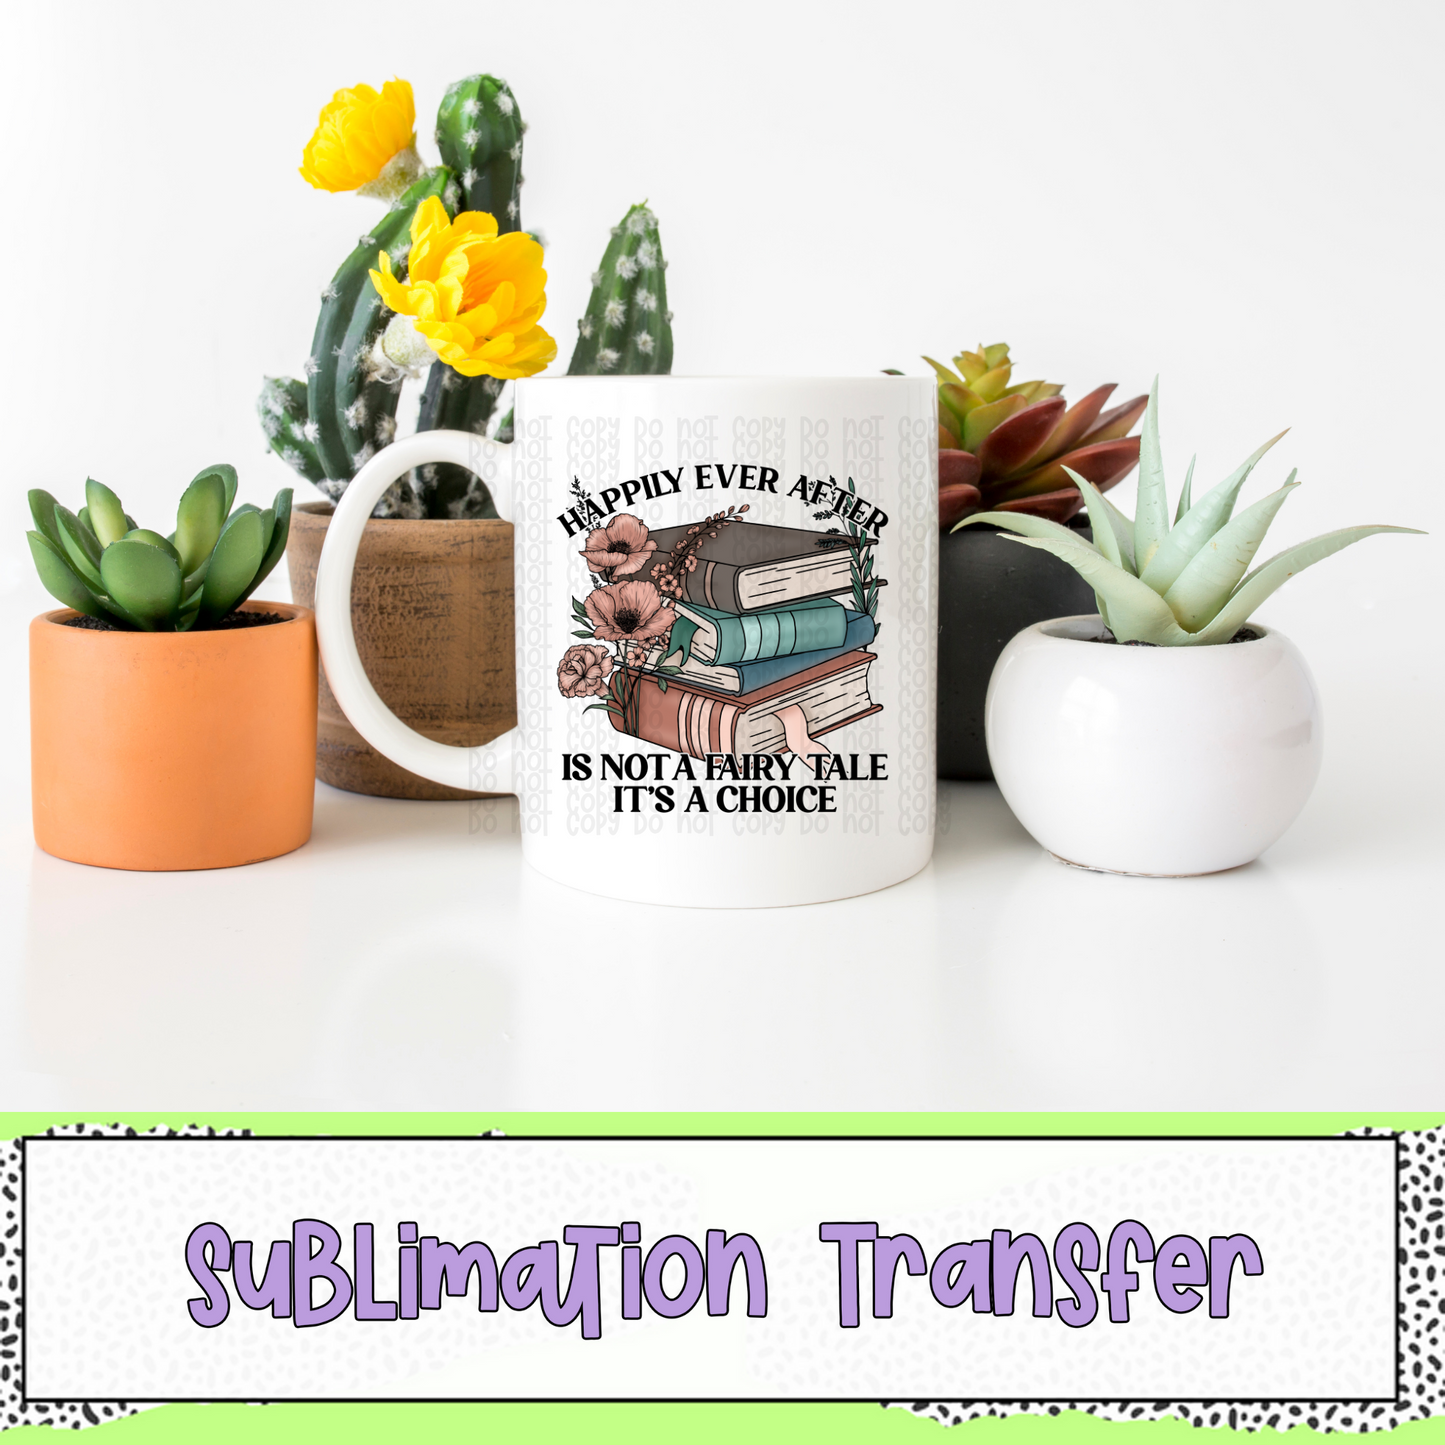 Happily Ever After - SUBLIMATION TRANSFER